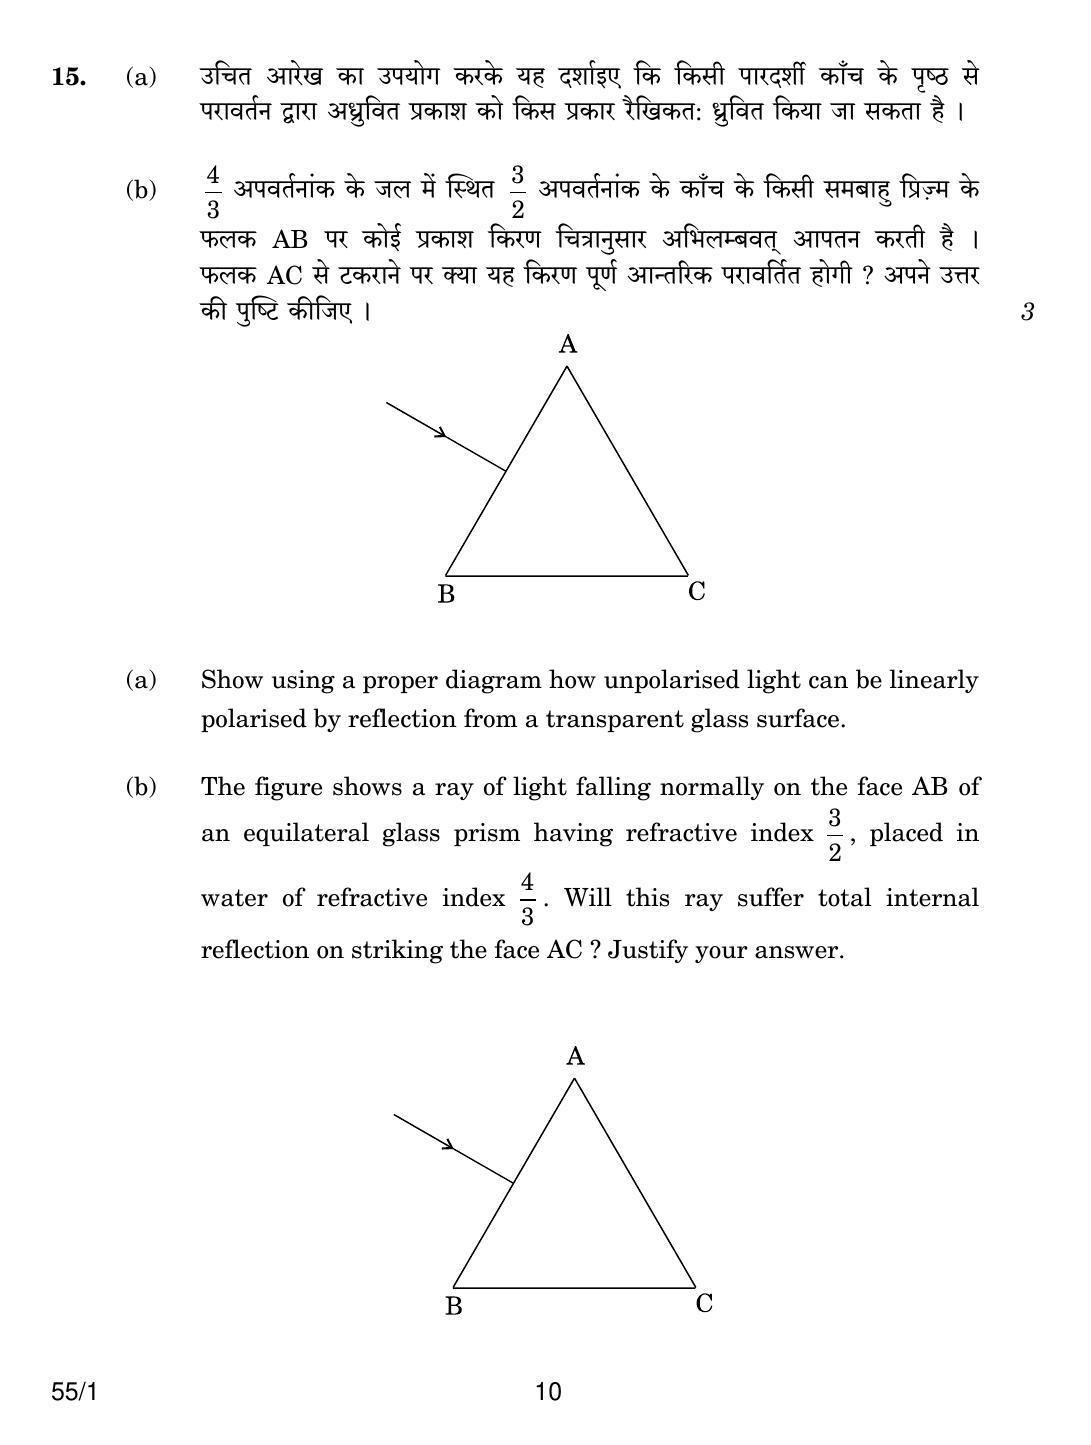 CBSE Class 12 55-1 PHYSICS 2018 Question Paper - Page 10